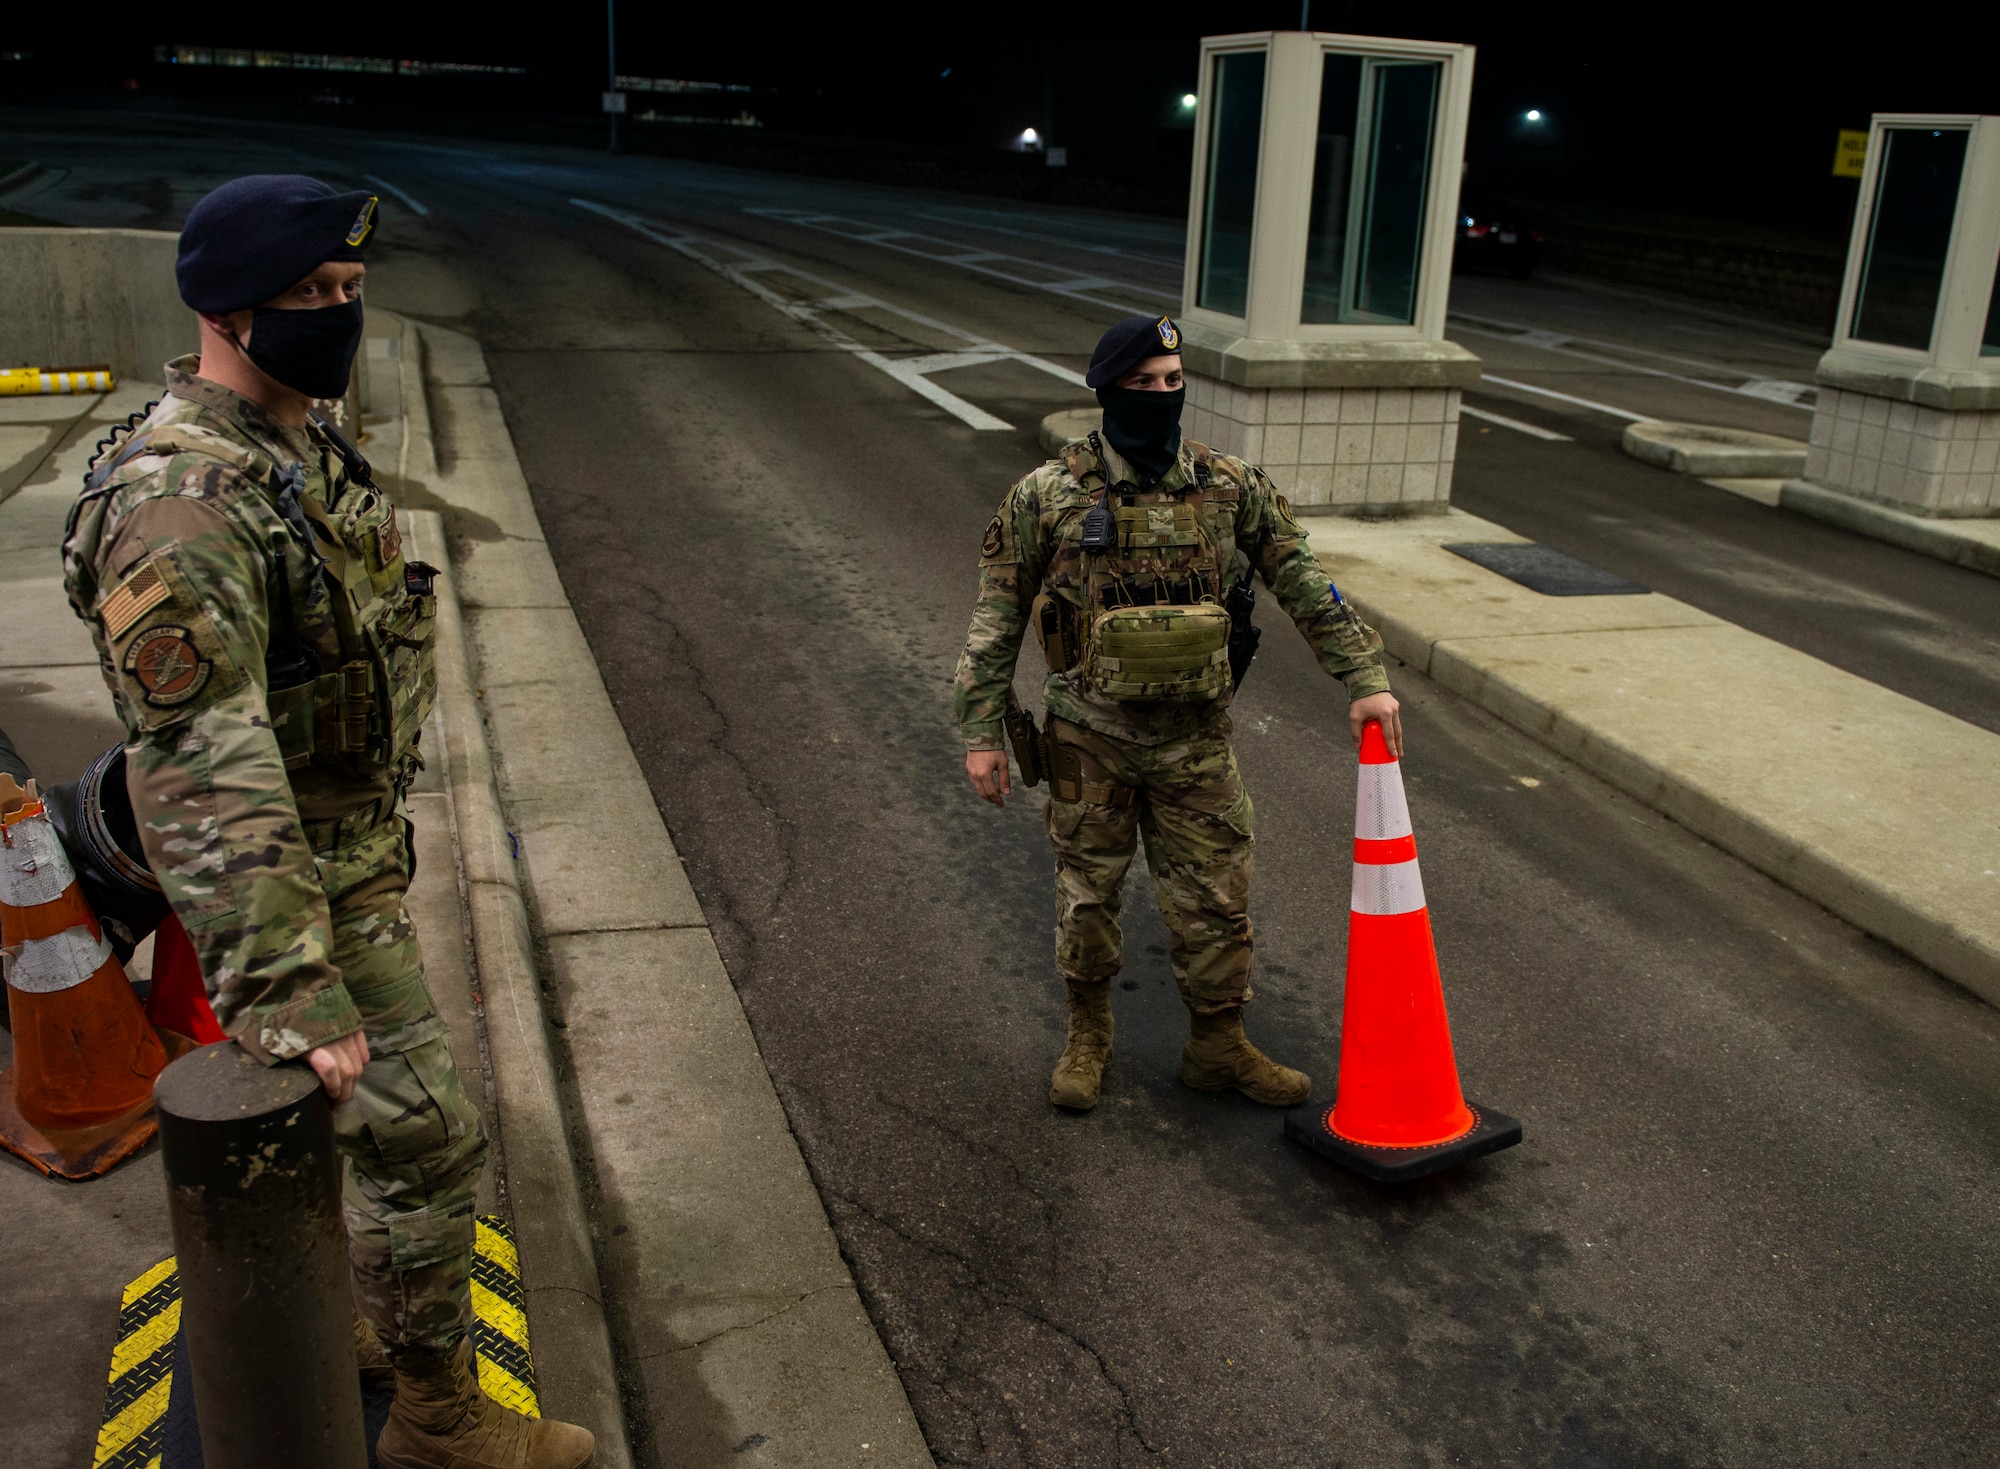 U.S. Air Force Staff Sgt. Jacob Swisher, 88th Security Forces Squadron base defense operations center controller, watches as a vehicle begins its approach to the gate as Airman 1st Class Jadon Dix, 88th SFS entry controllers and alarm monitor, prepares to remove a traffic cone at gate 19B, March 16, 2021 at Wright-Patterson Air Force Base, Ohio. Security Forces members are responsible for providing base defense, as well as providing law enforcement on the installation. (U.S. Air Force photo by Wesley Farnsworth)